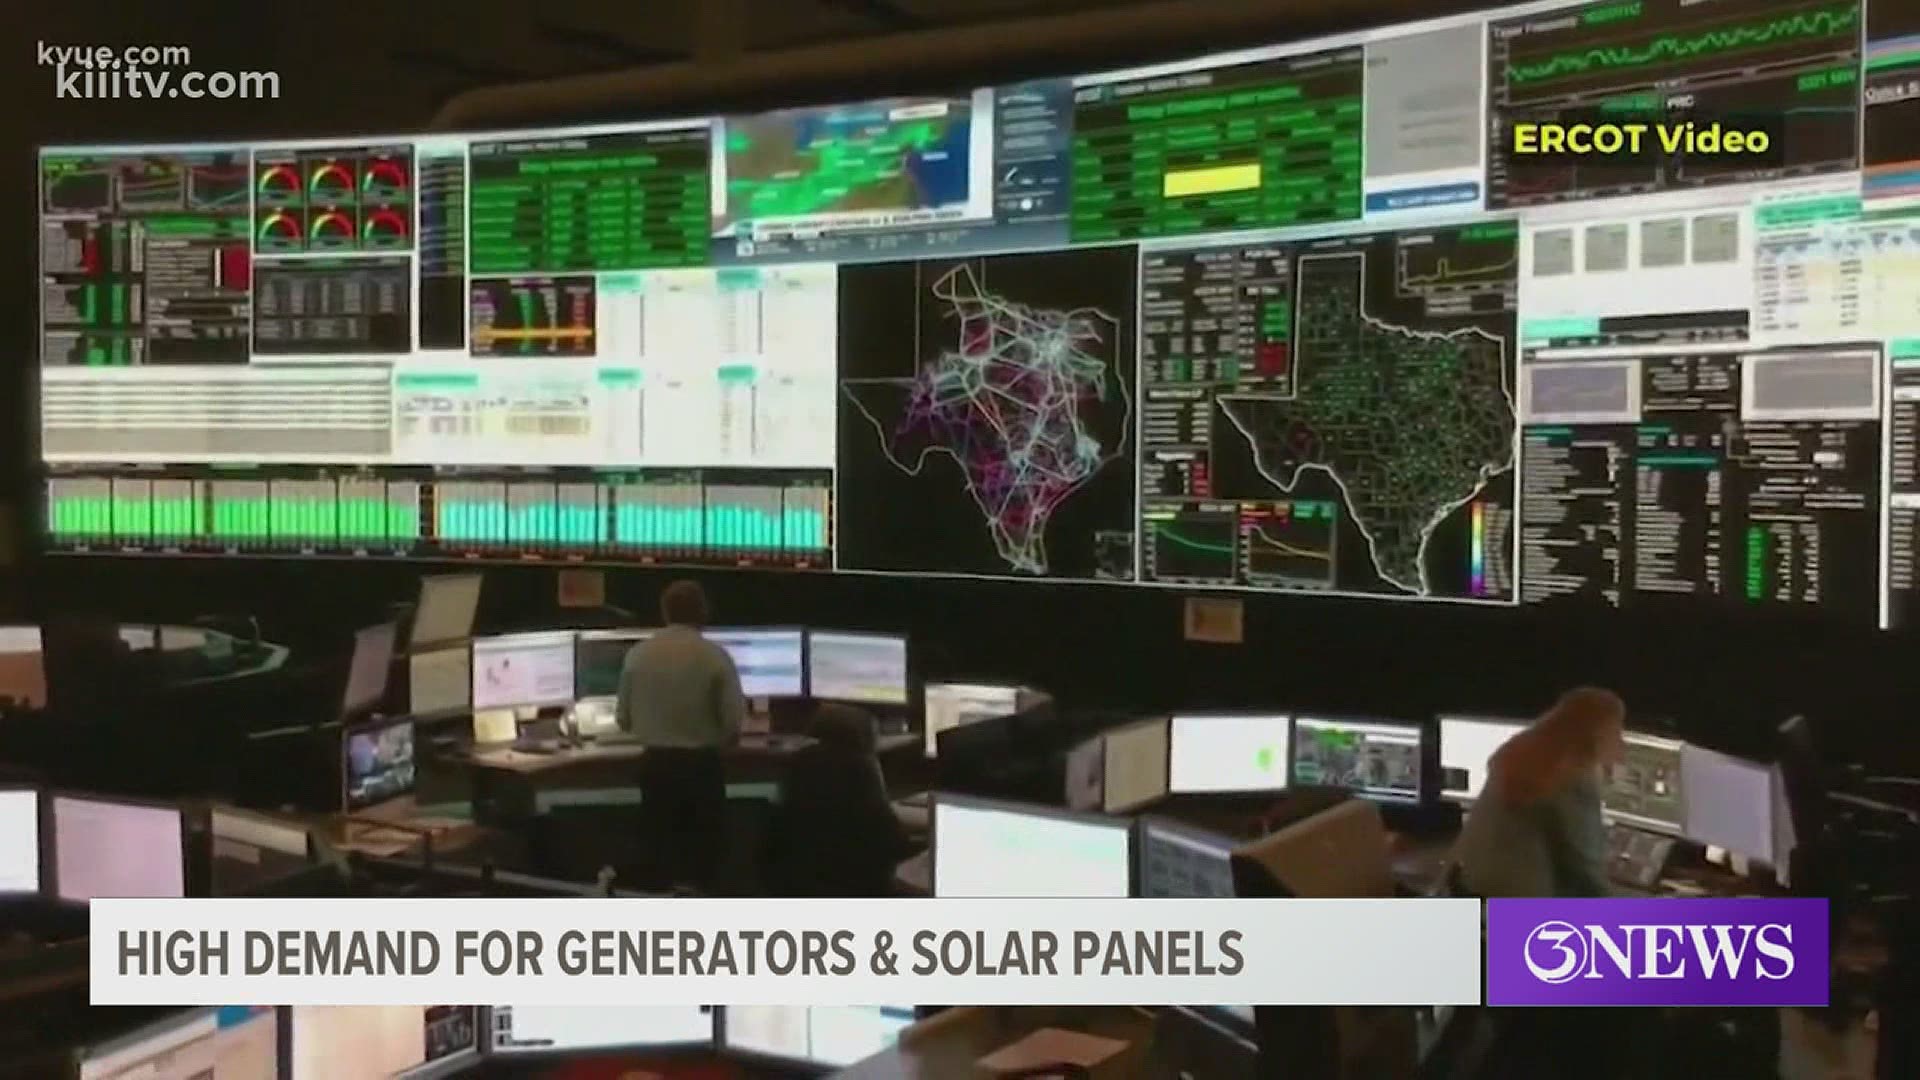 While the business is booming over at Generator Super Center, so is the solar panel business.